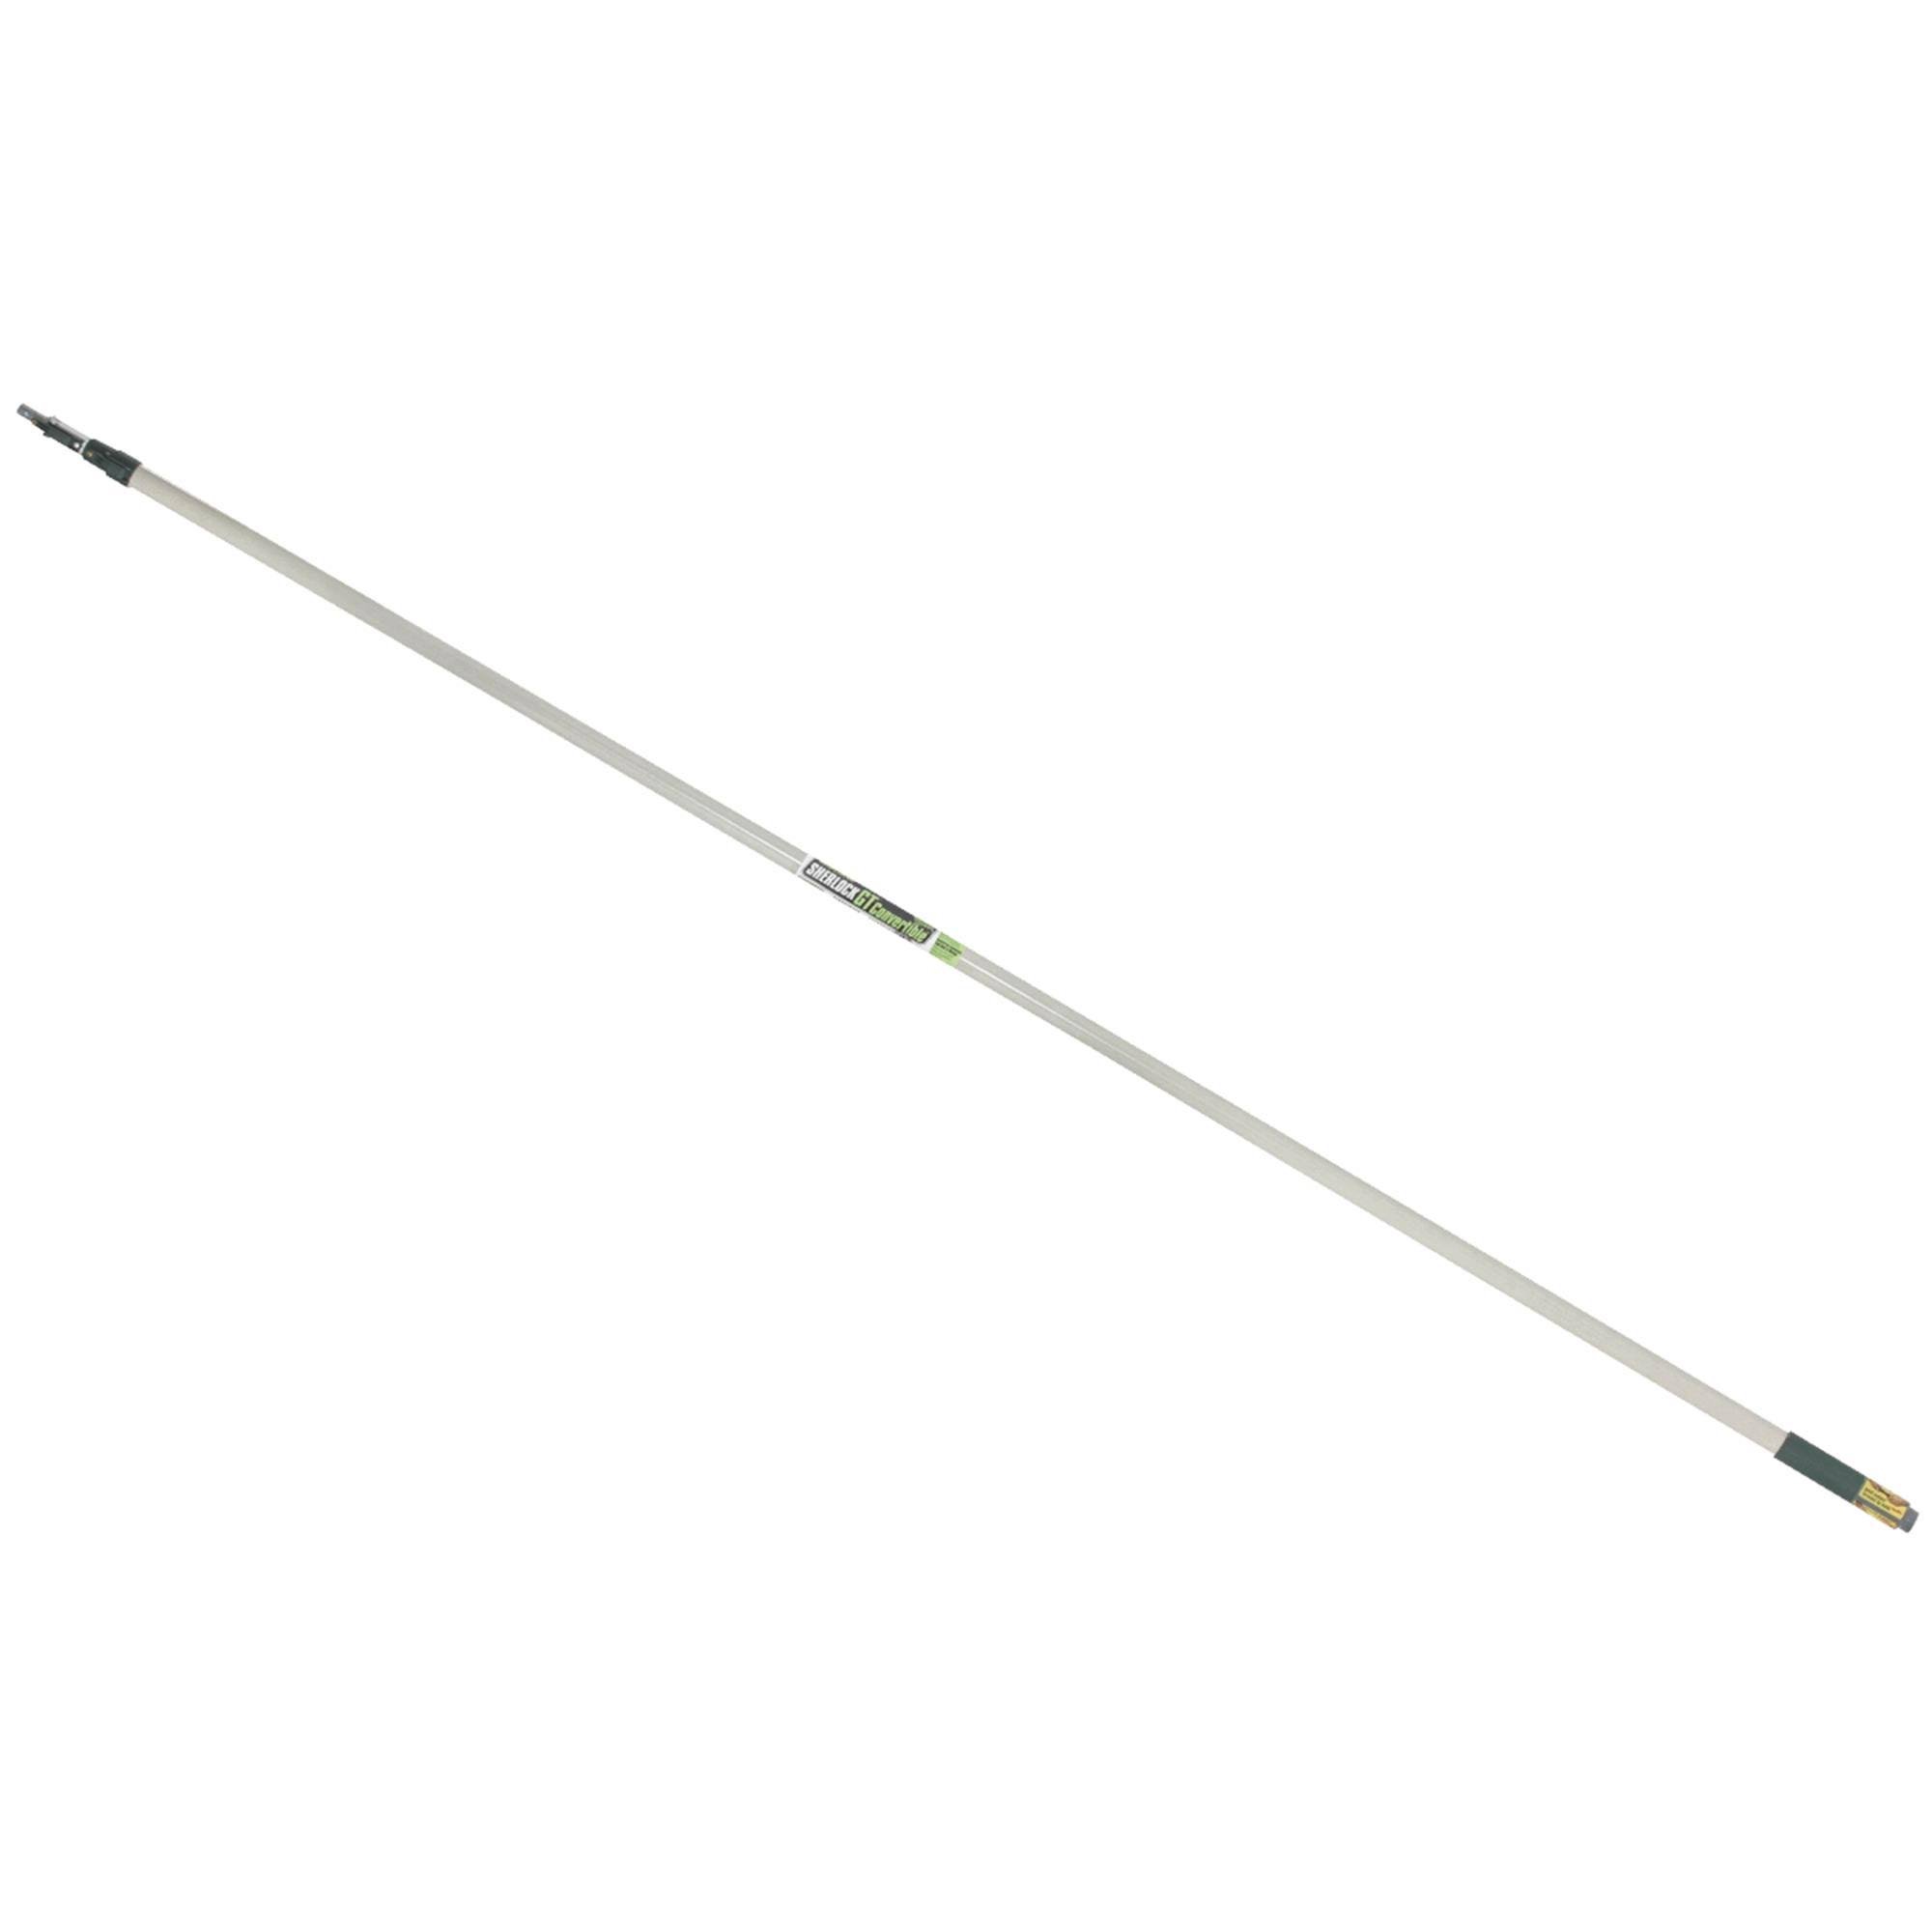 Wooster Brush R096 Sherlock GT Extension Pole, None, 2.4m - 4.9m | Garage | Delivery Guaranteed | 30 Day Money Back Guarantee | Best Price Guarantee